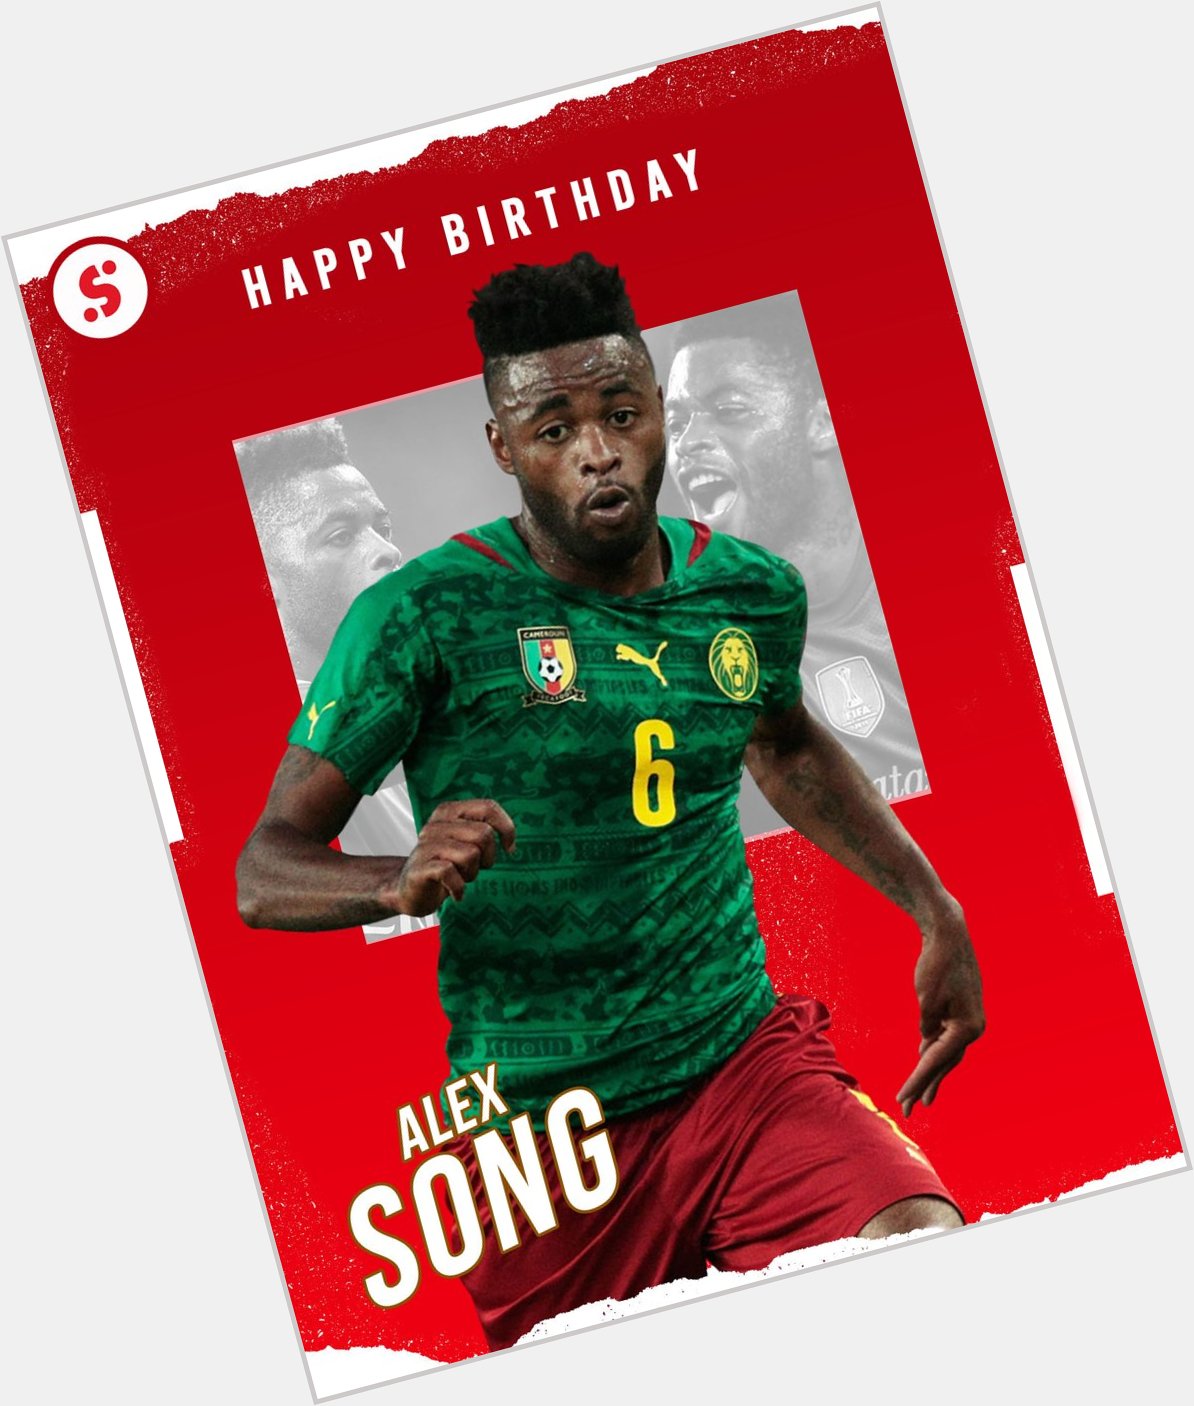 Happy birthday to former Arsenal midfielder Alex Song, who turns 3  5  today!      